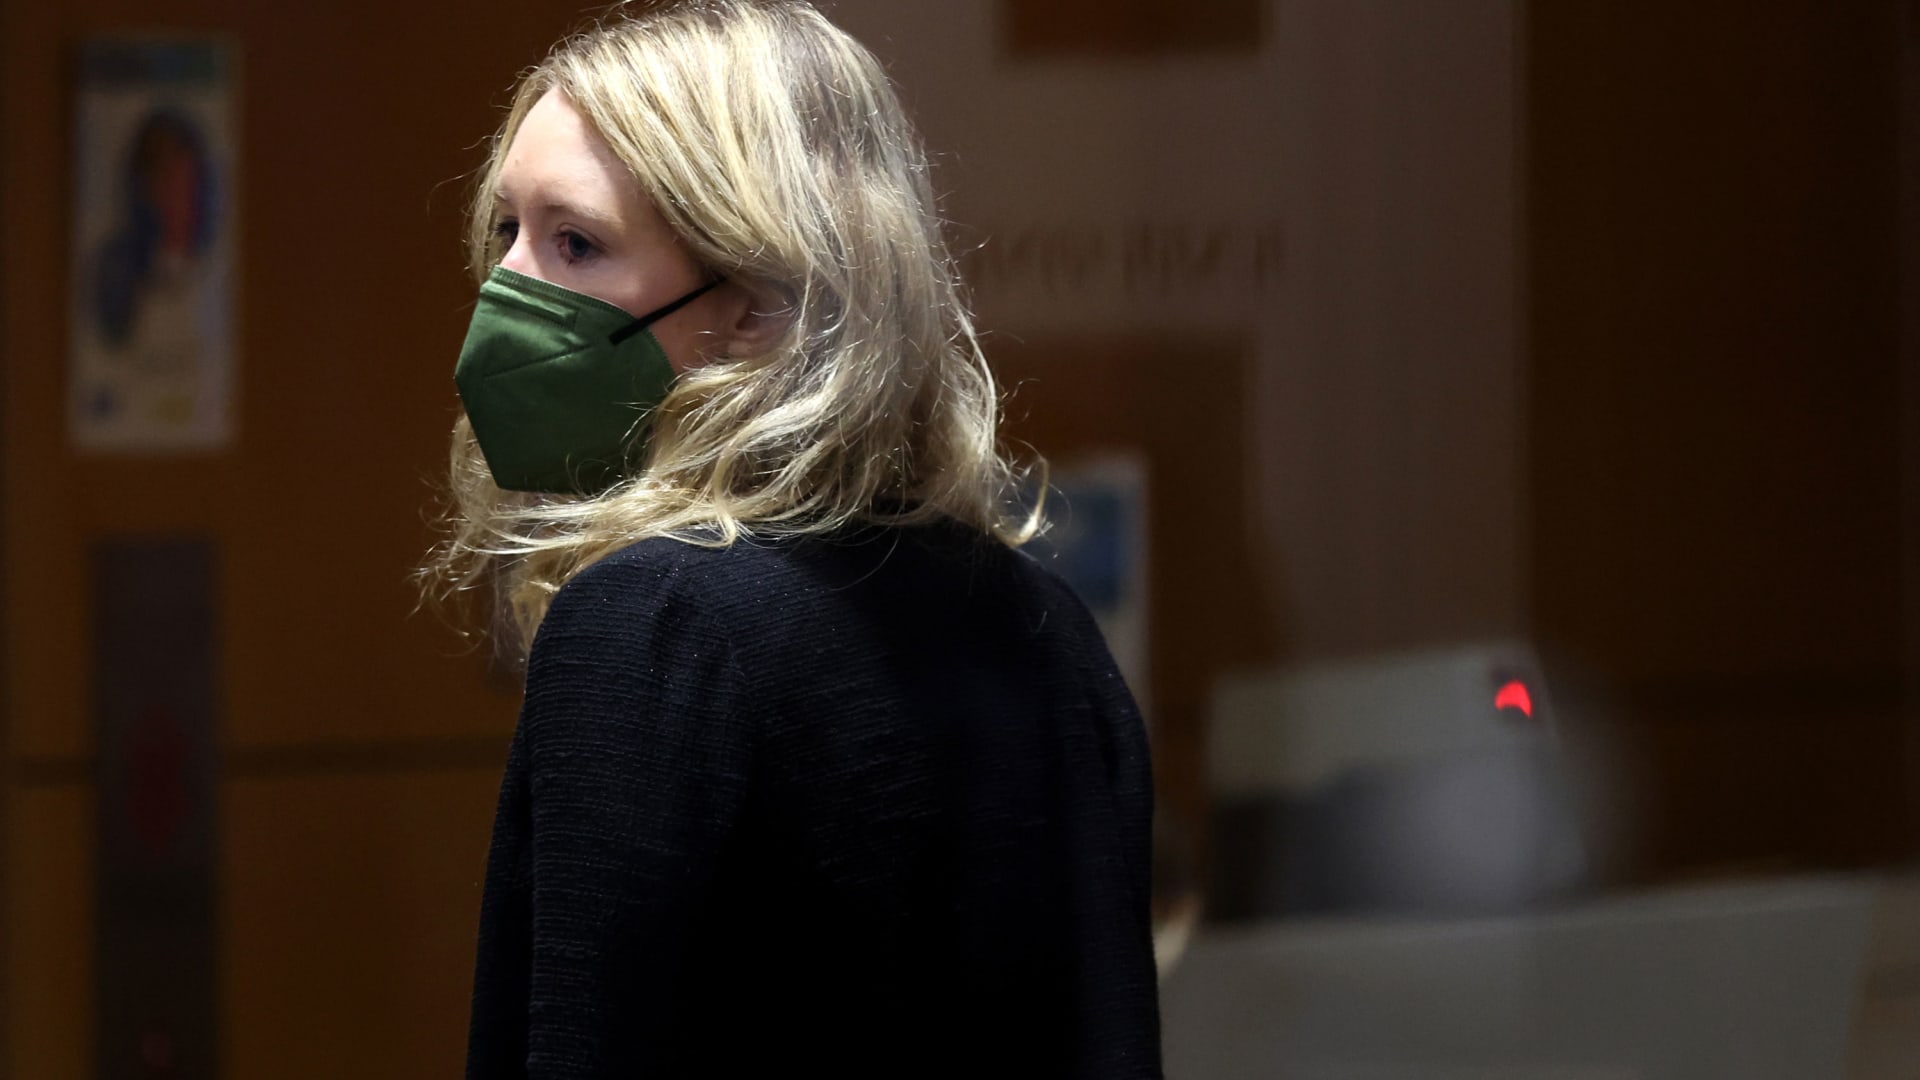 Theranos founder Elizabeth Holmes set to report to prison on Tuesday